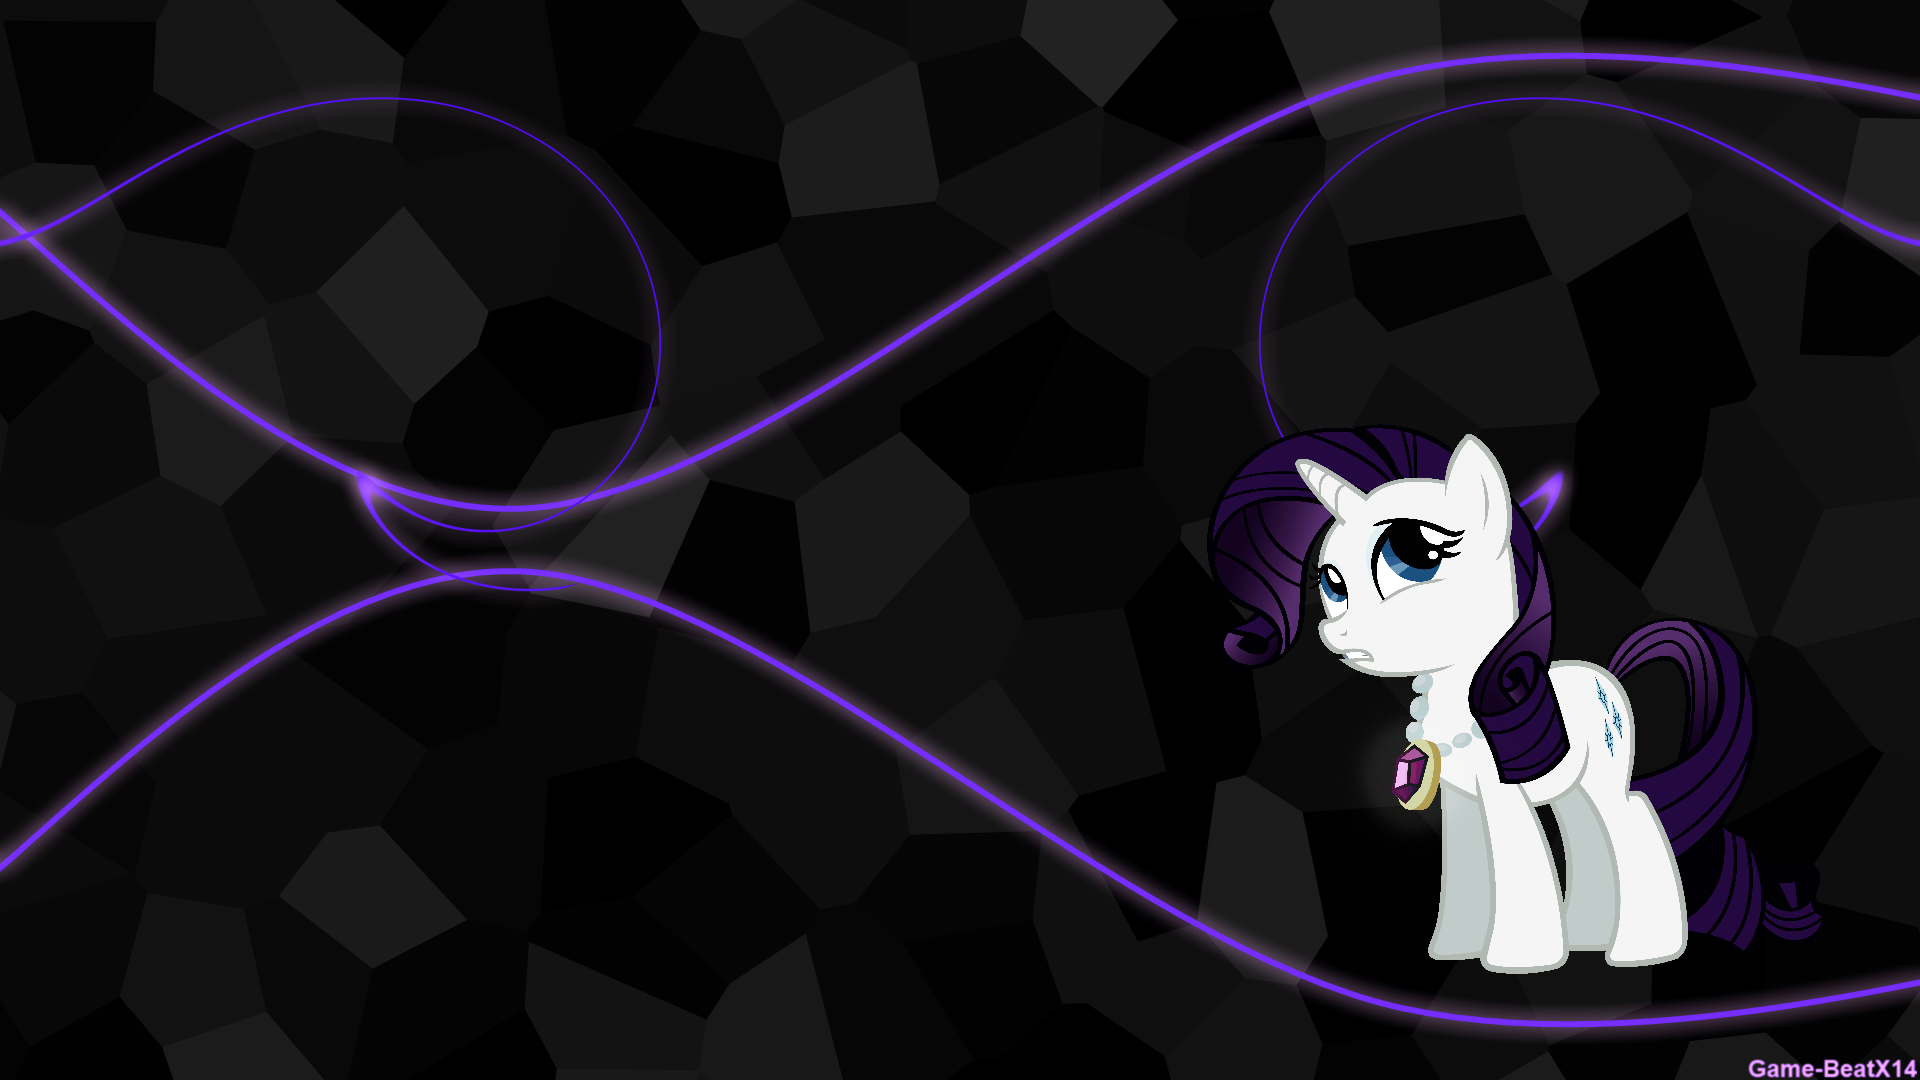 Rarity Wallpaper by Capt-Nemo and Game-BeatX14